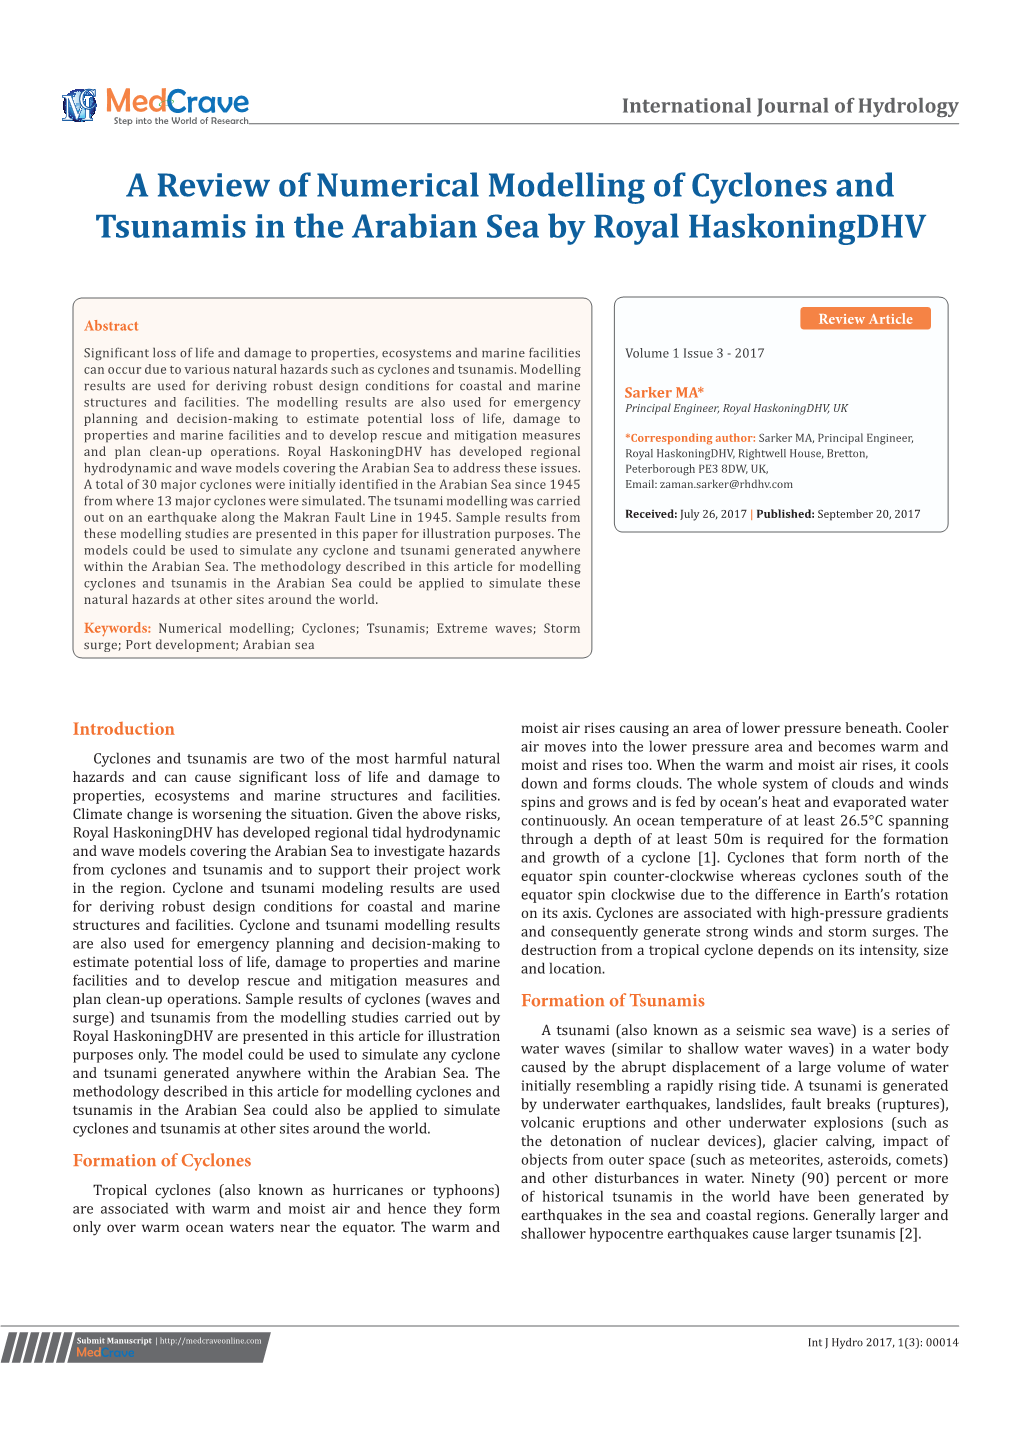 A Review of Numerical Modelling of Cyclones and Tsunamis in the Arabian Sea by Royal Haskoningdhv